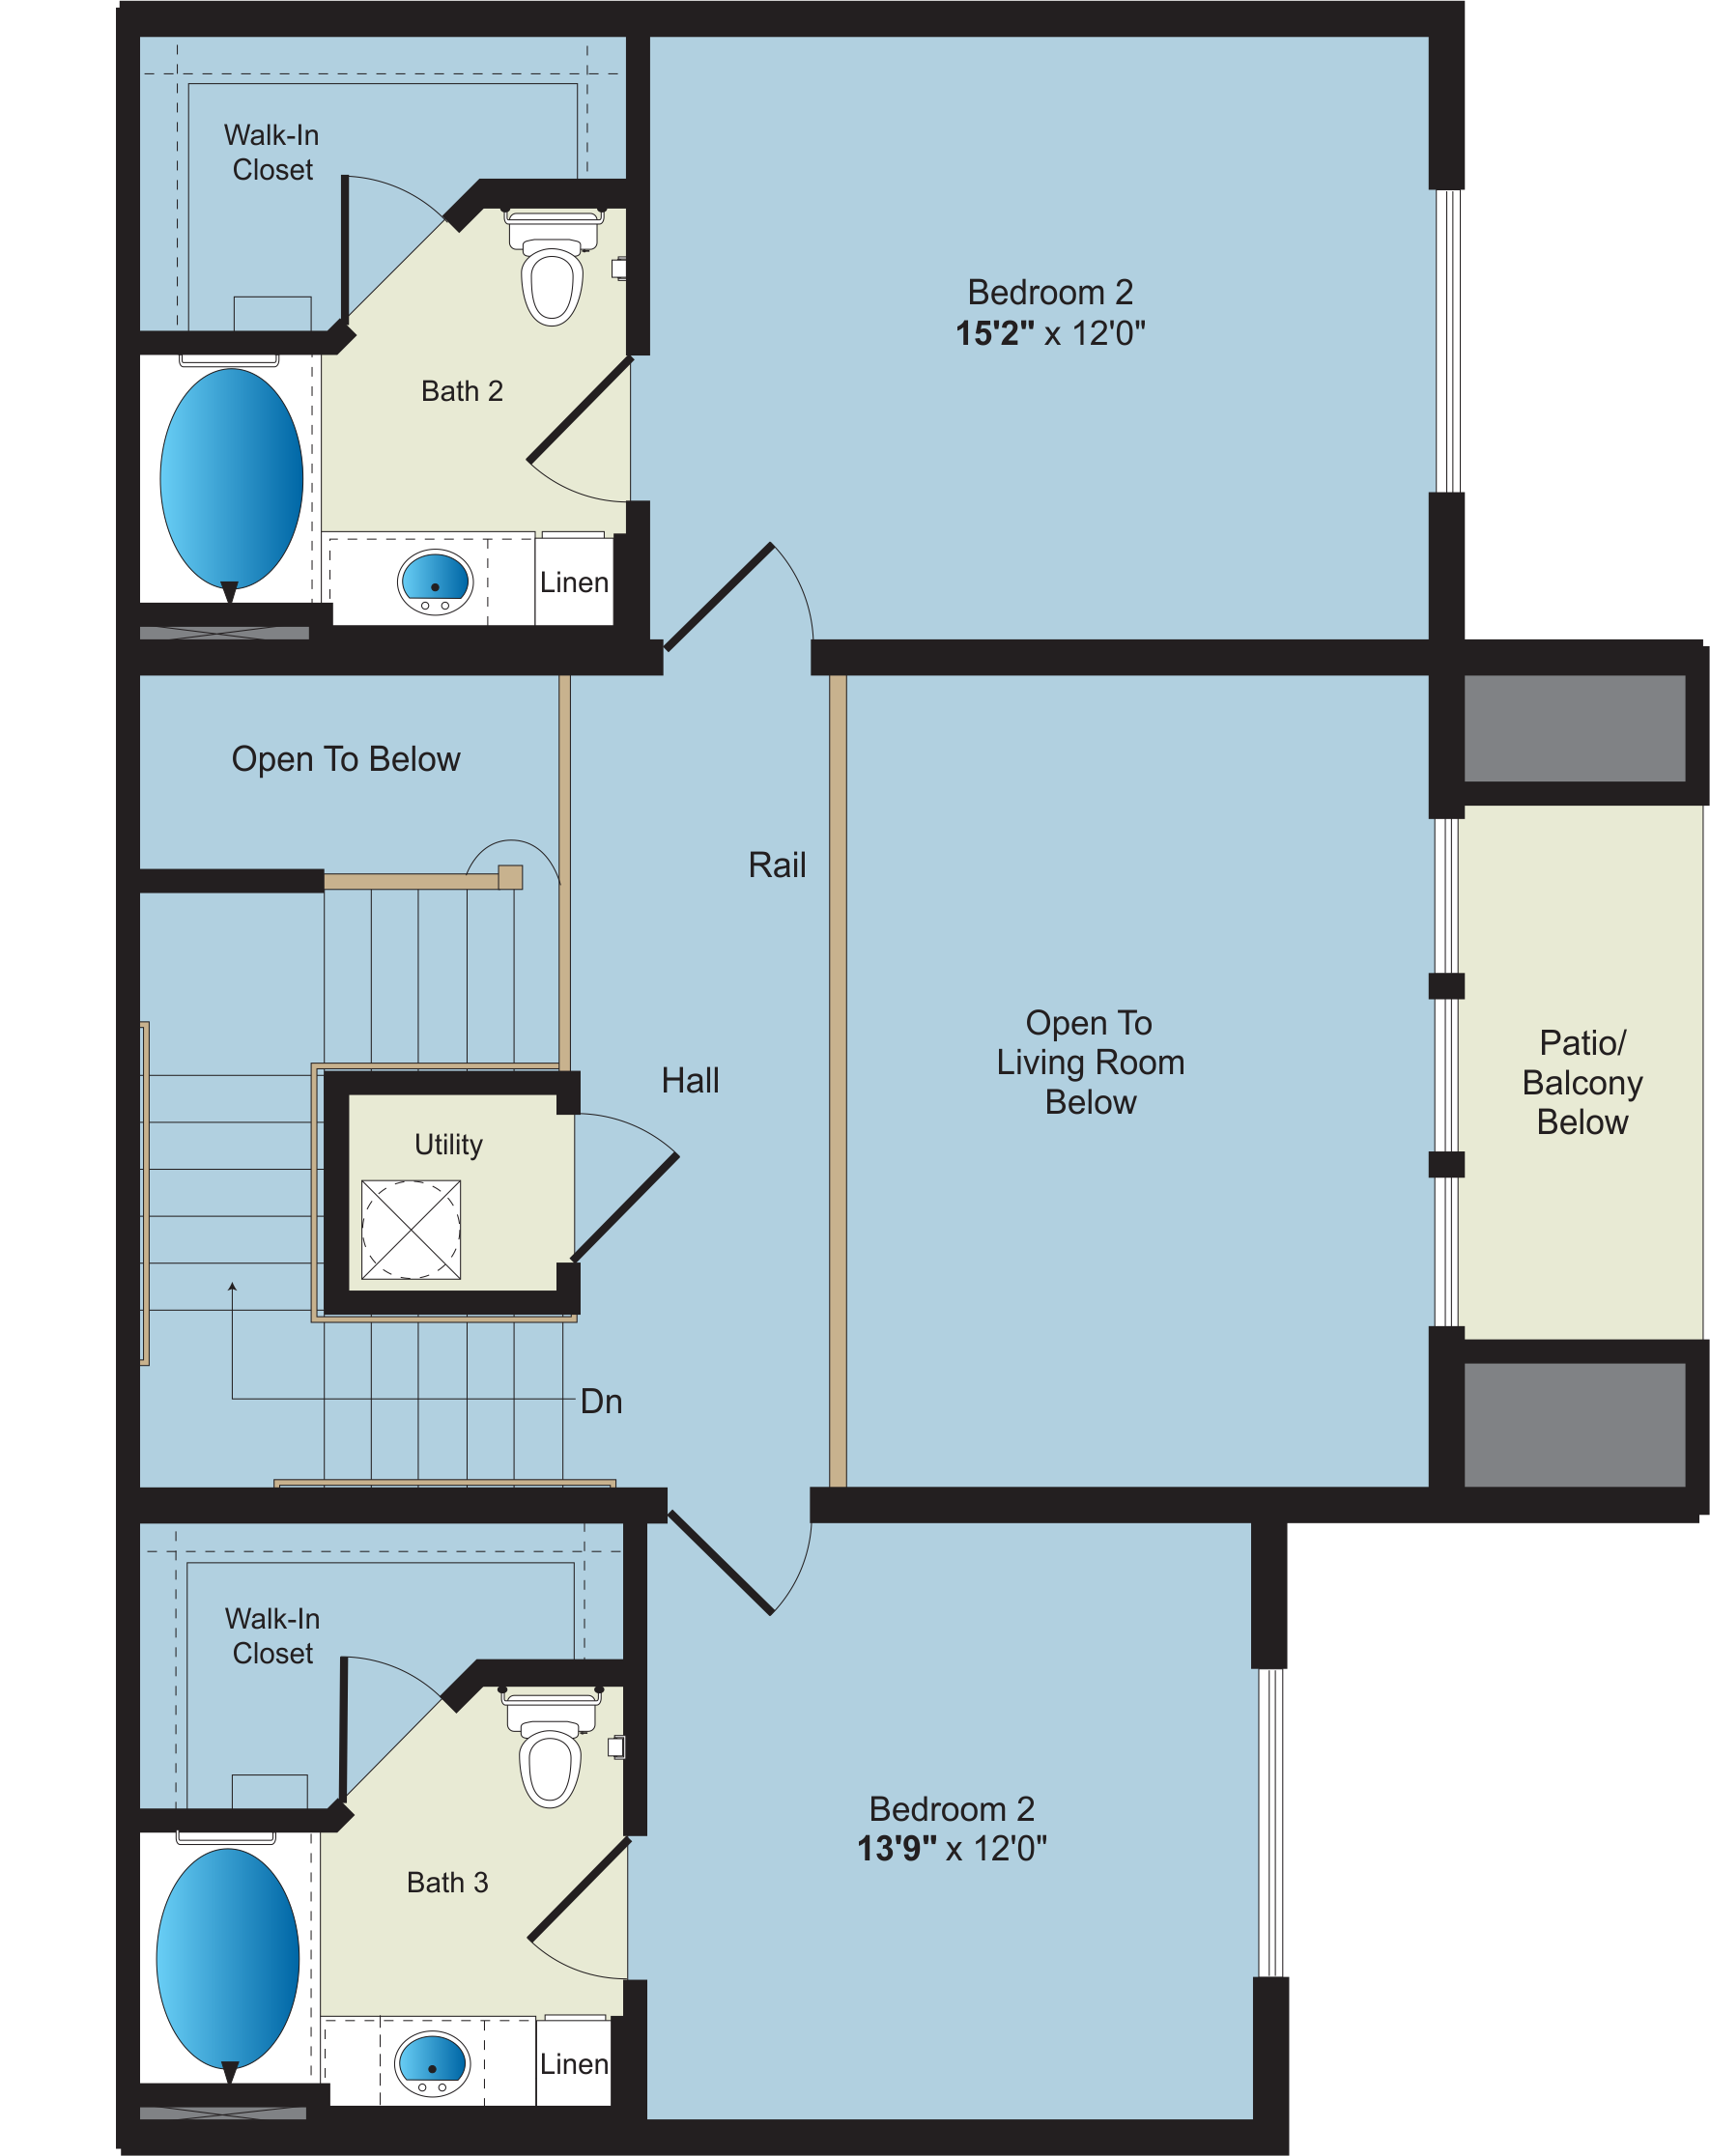 A floor plan of a two bedroom apartment available for Apartment Rentals.